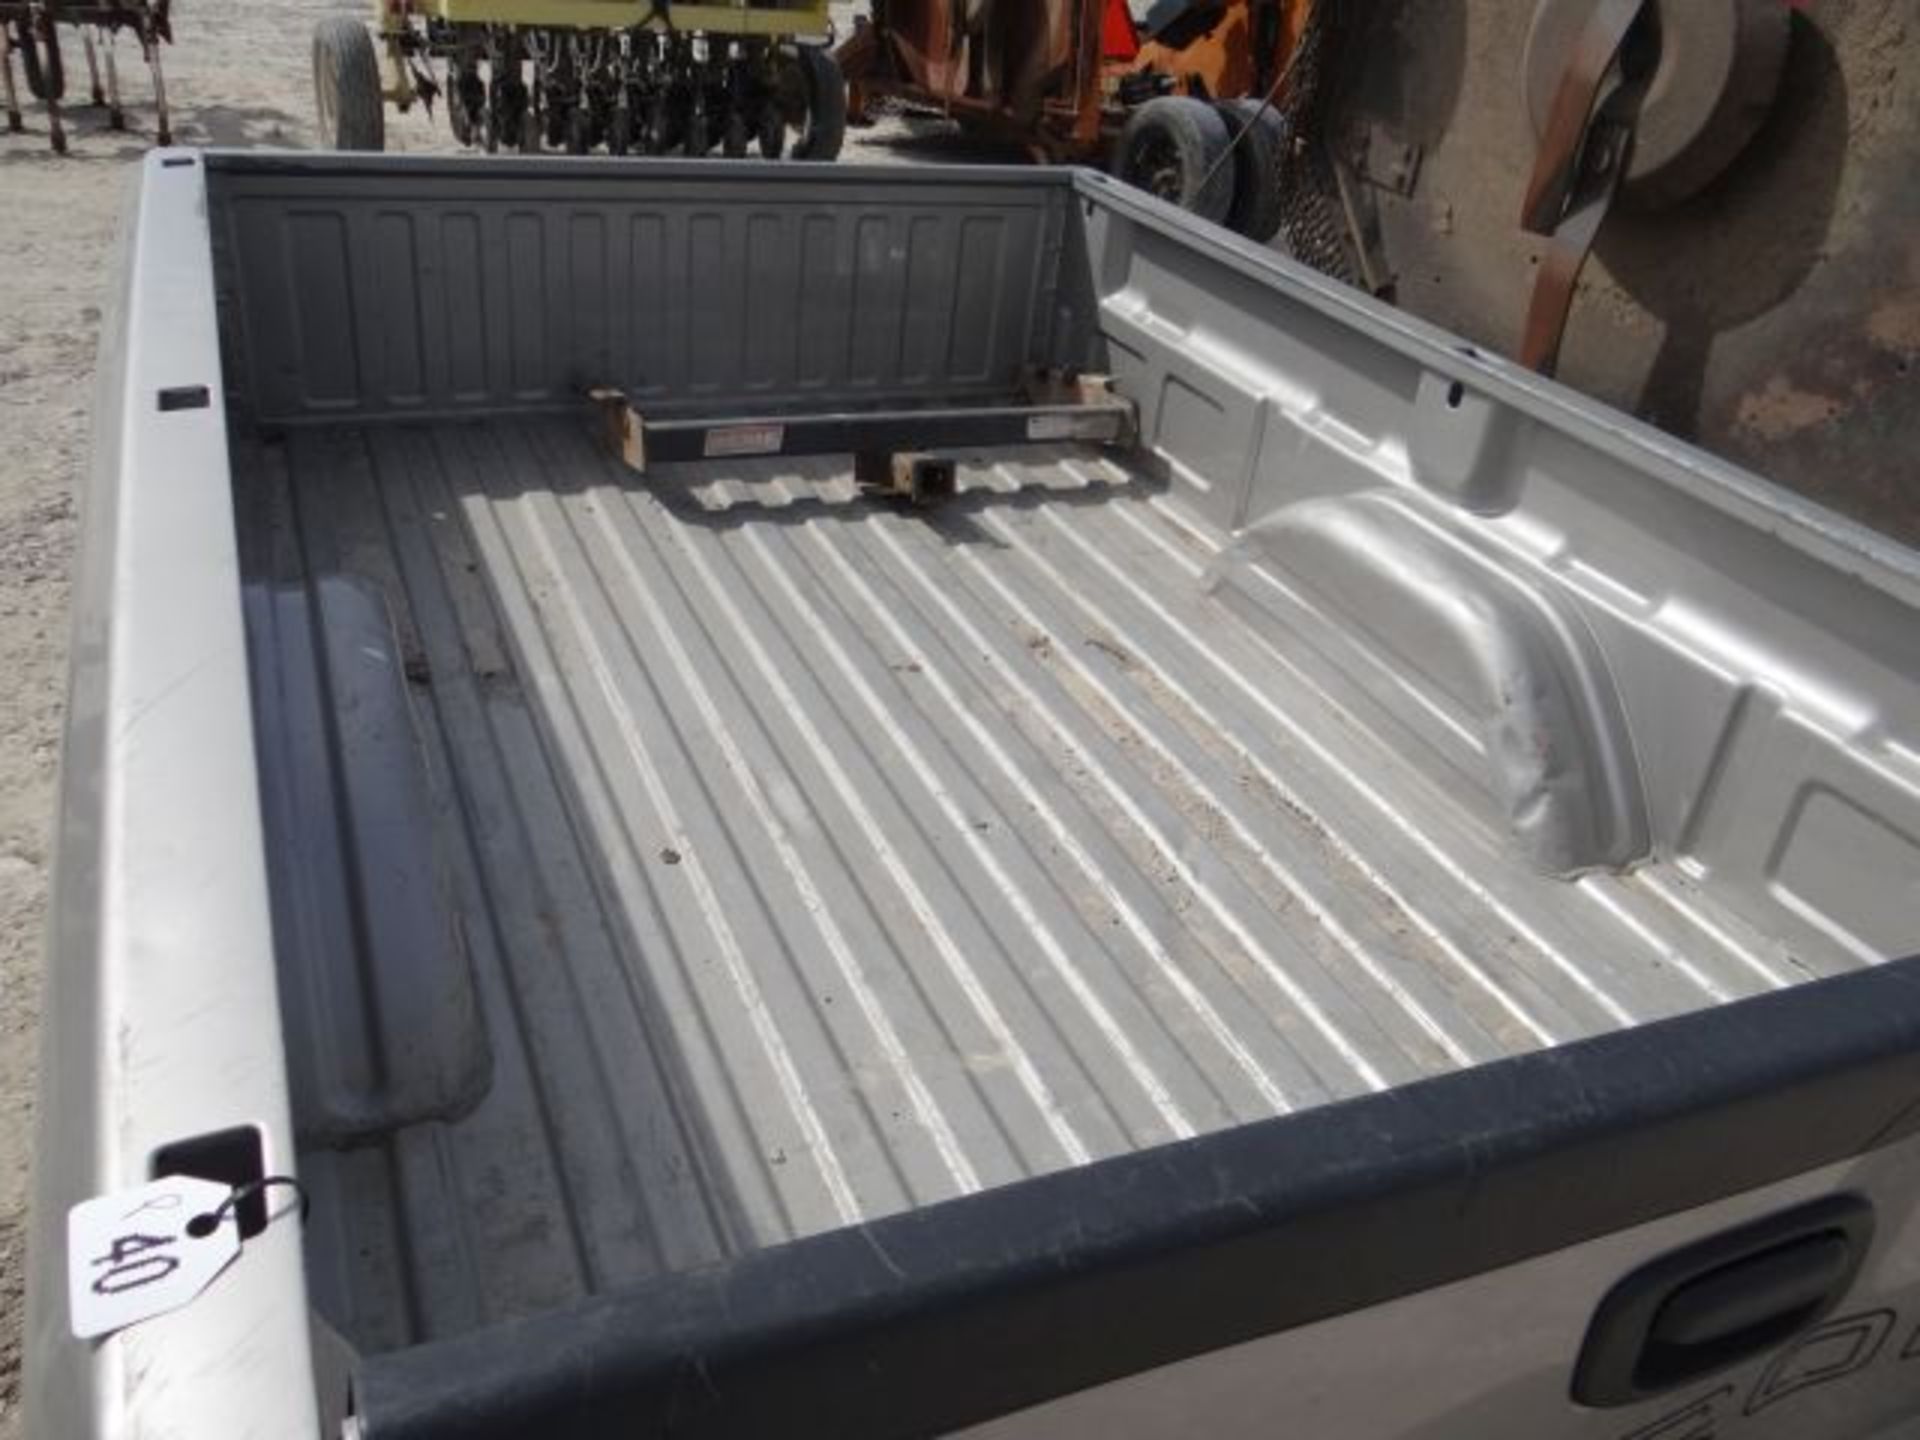 Chevrolet Truck Bed - Image 2 of 4